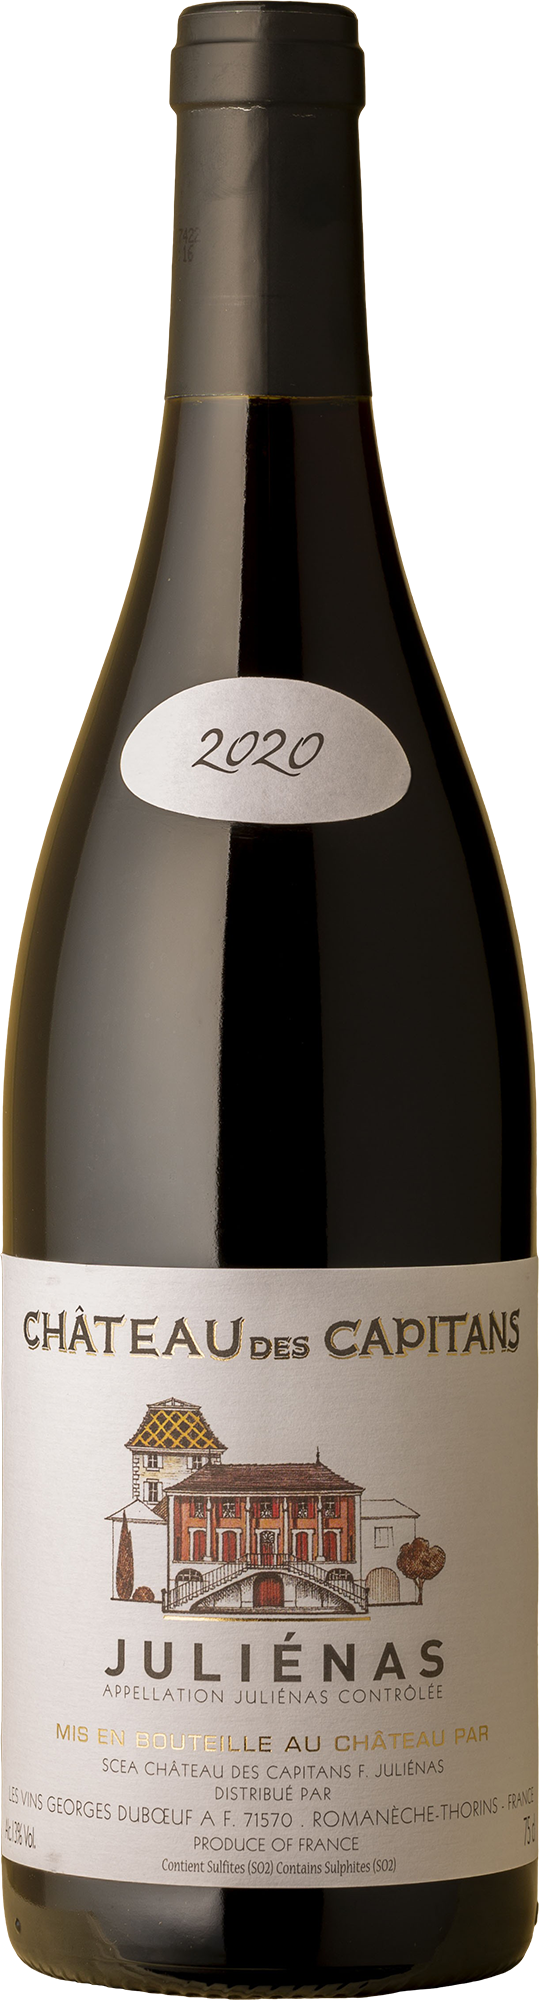 Georges Duboeuf - Juliénas Château des Capitans Gamay 2020 Red Wine